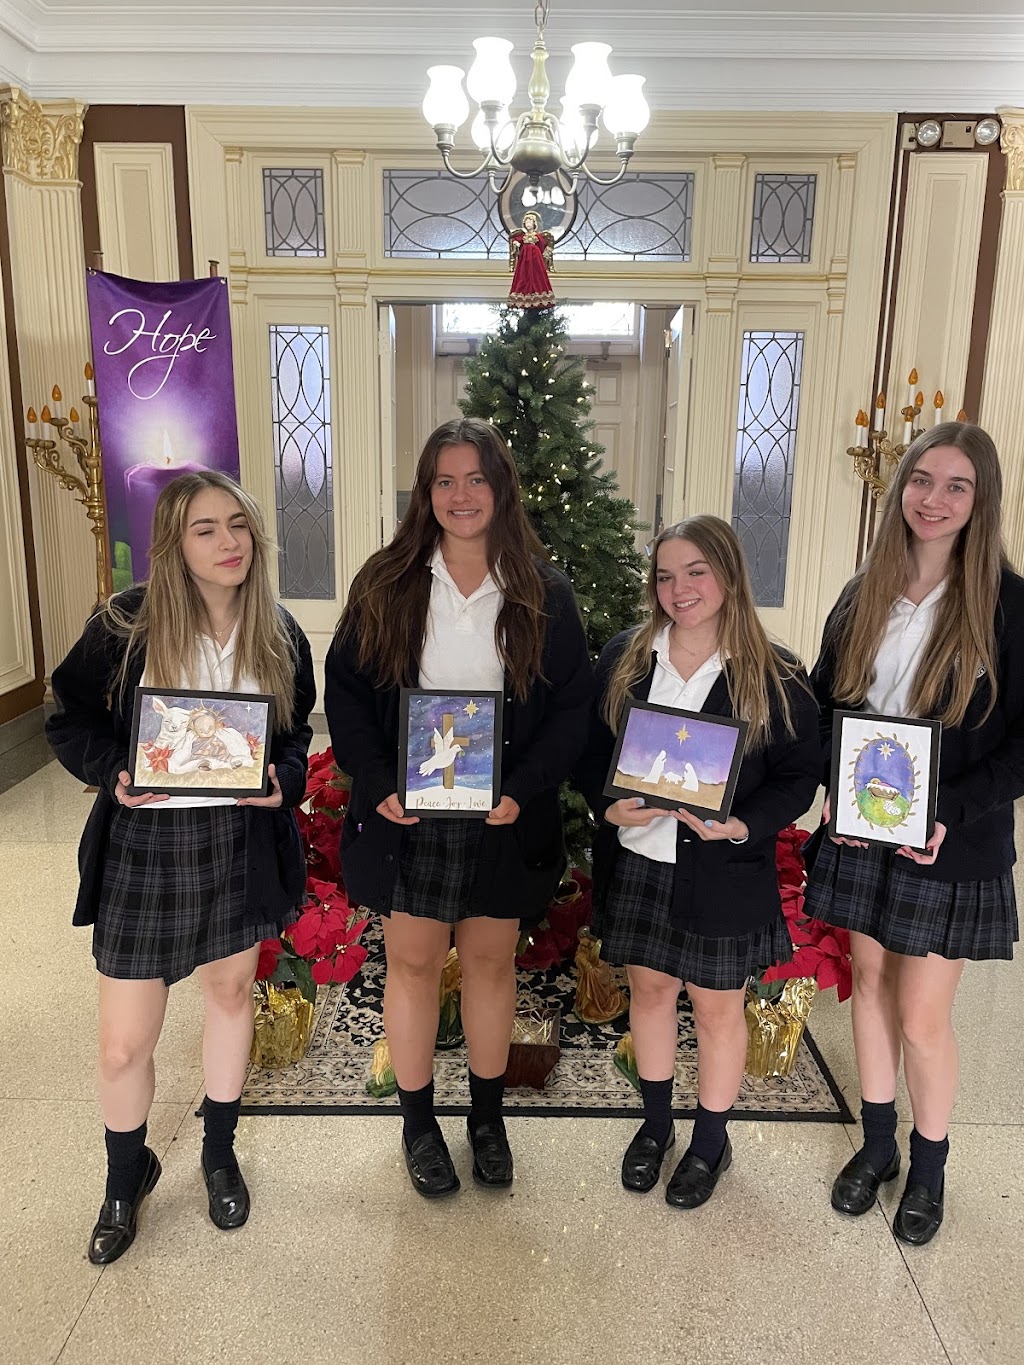 Our Lady of Mercy Academy | 815 Convent Rd, Syosset, NY 11791 | Phone: (516) 921-1047